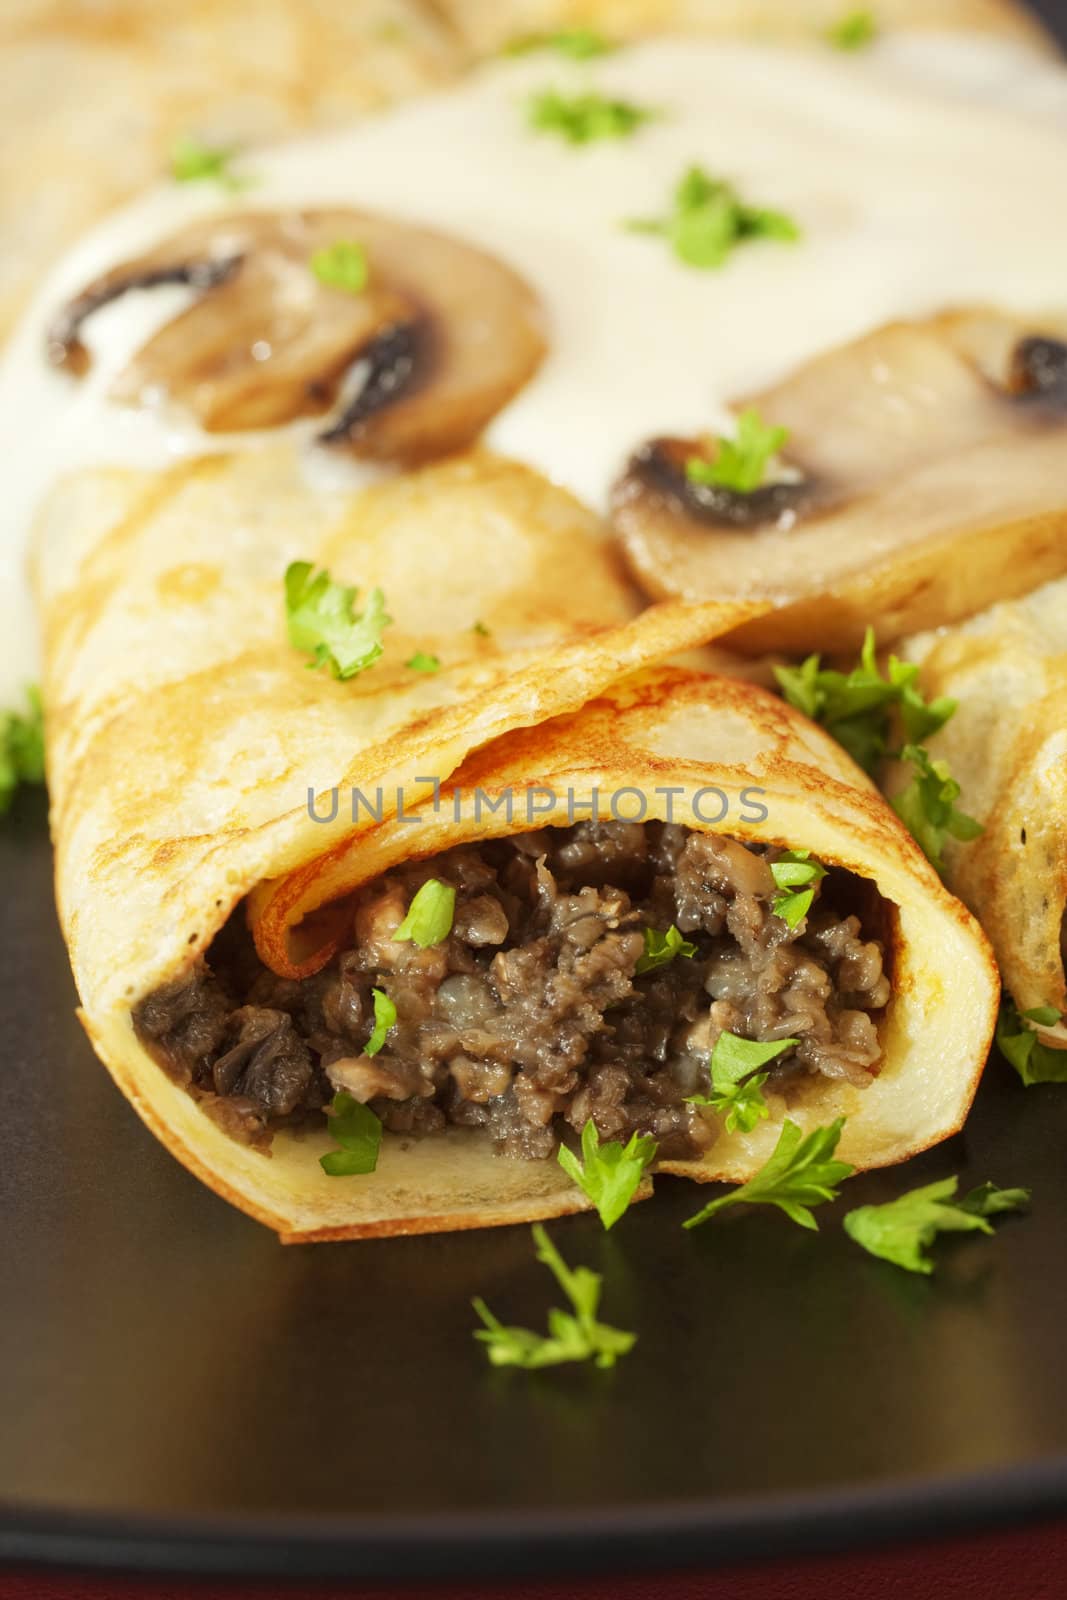 Crepes stuffed with mushroom duxelles and topped with bechamel sauce.